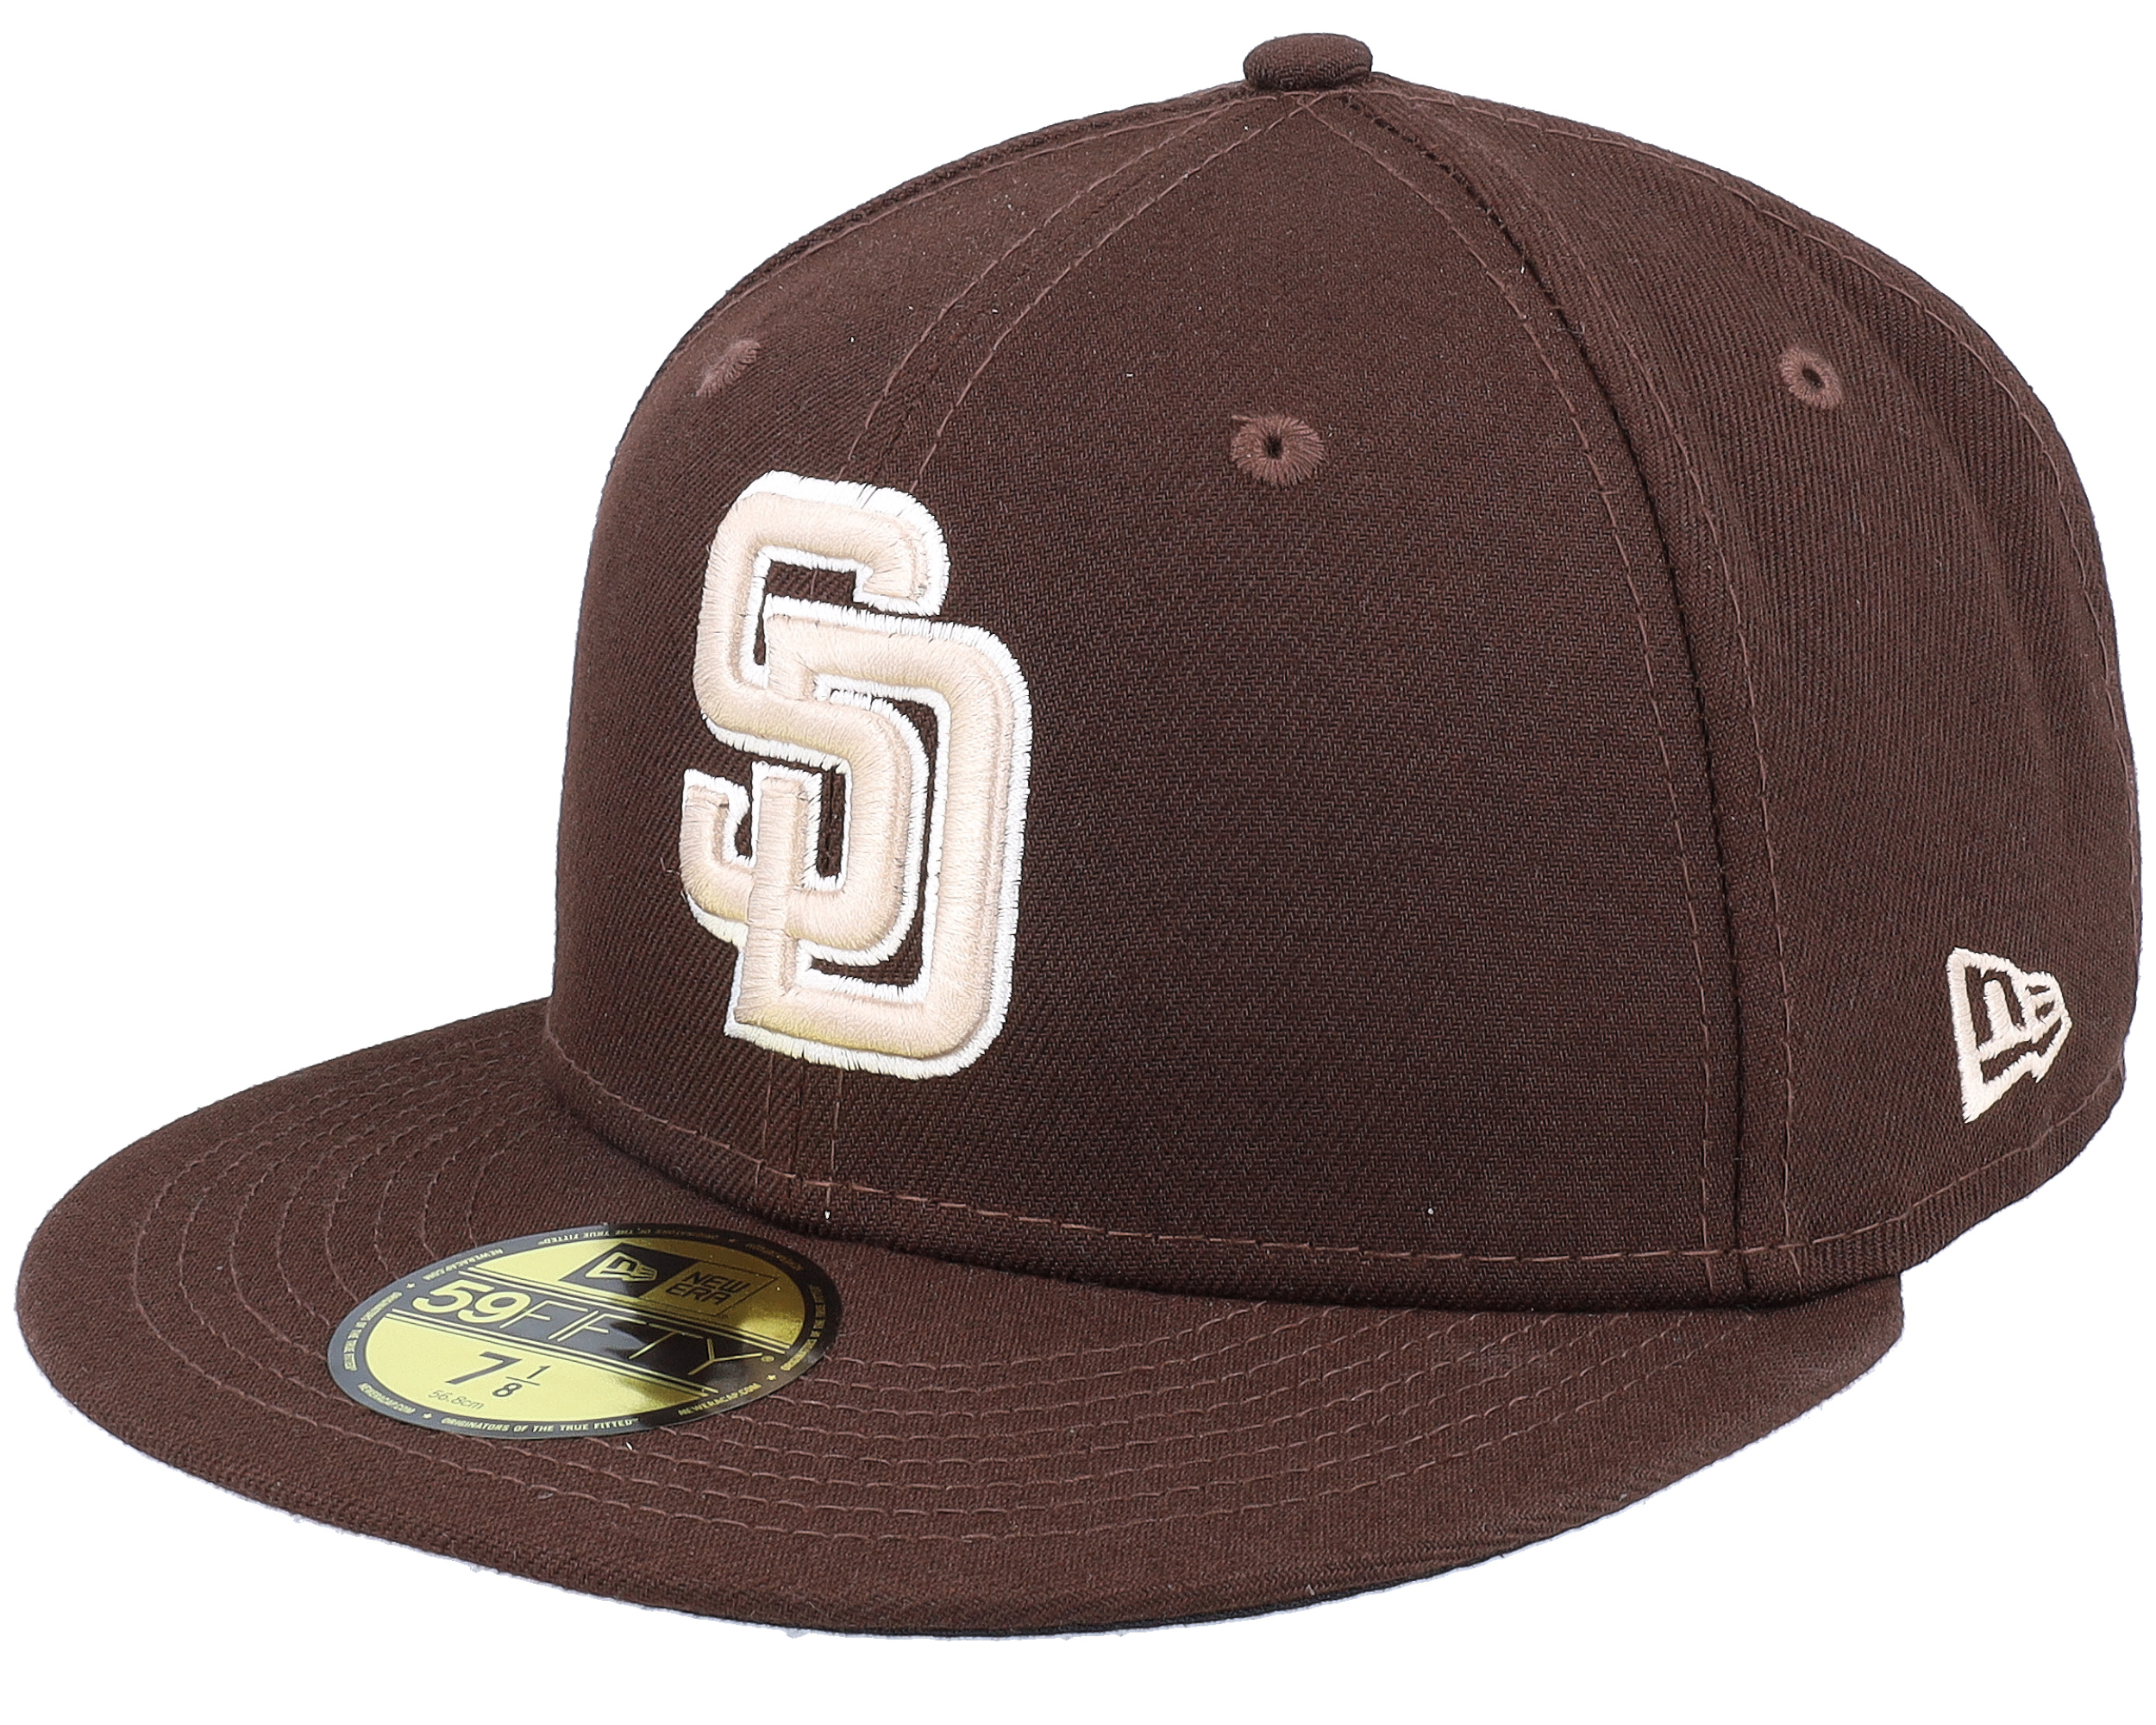 San Diego Padres Light Brown Straw Hat  San diego padres, Team colors,  Straw hat